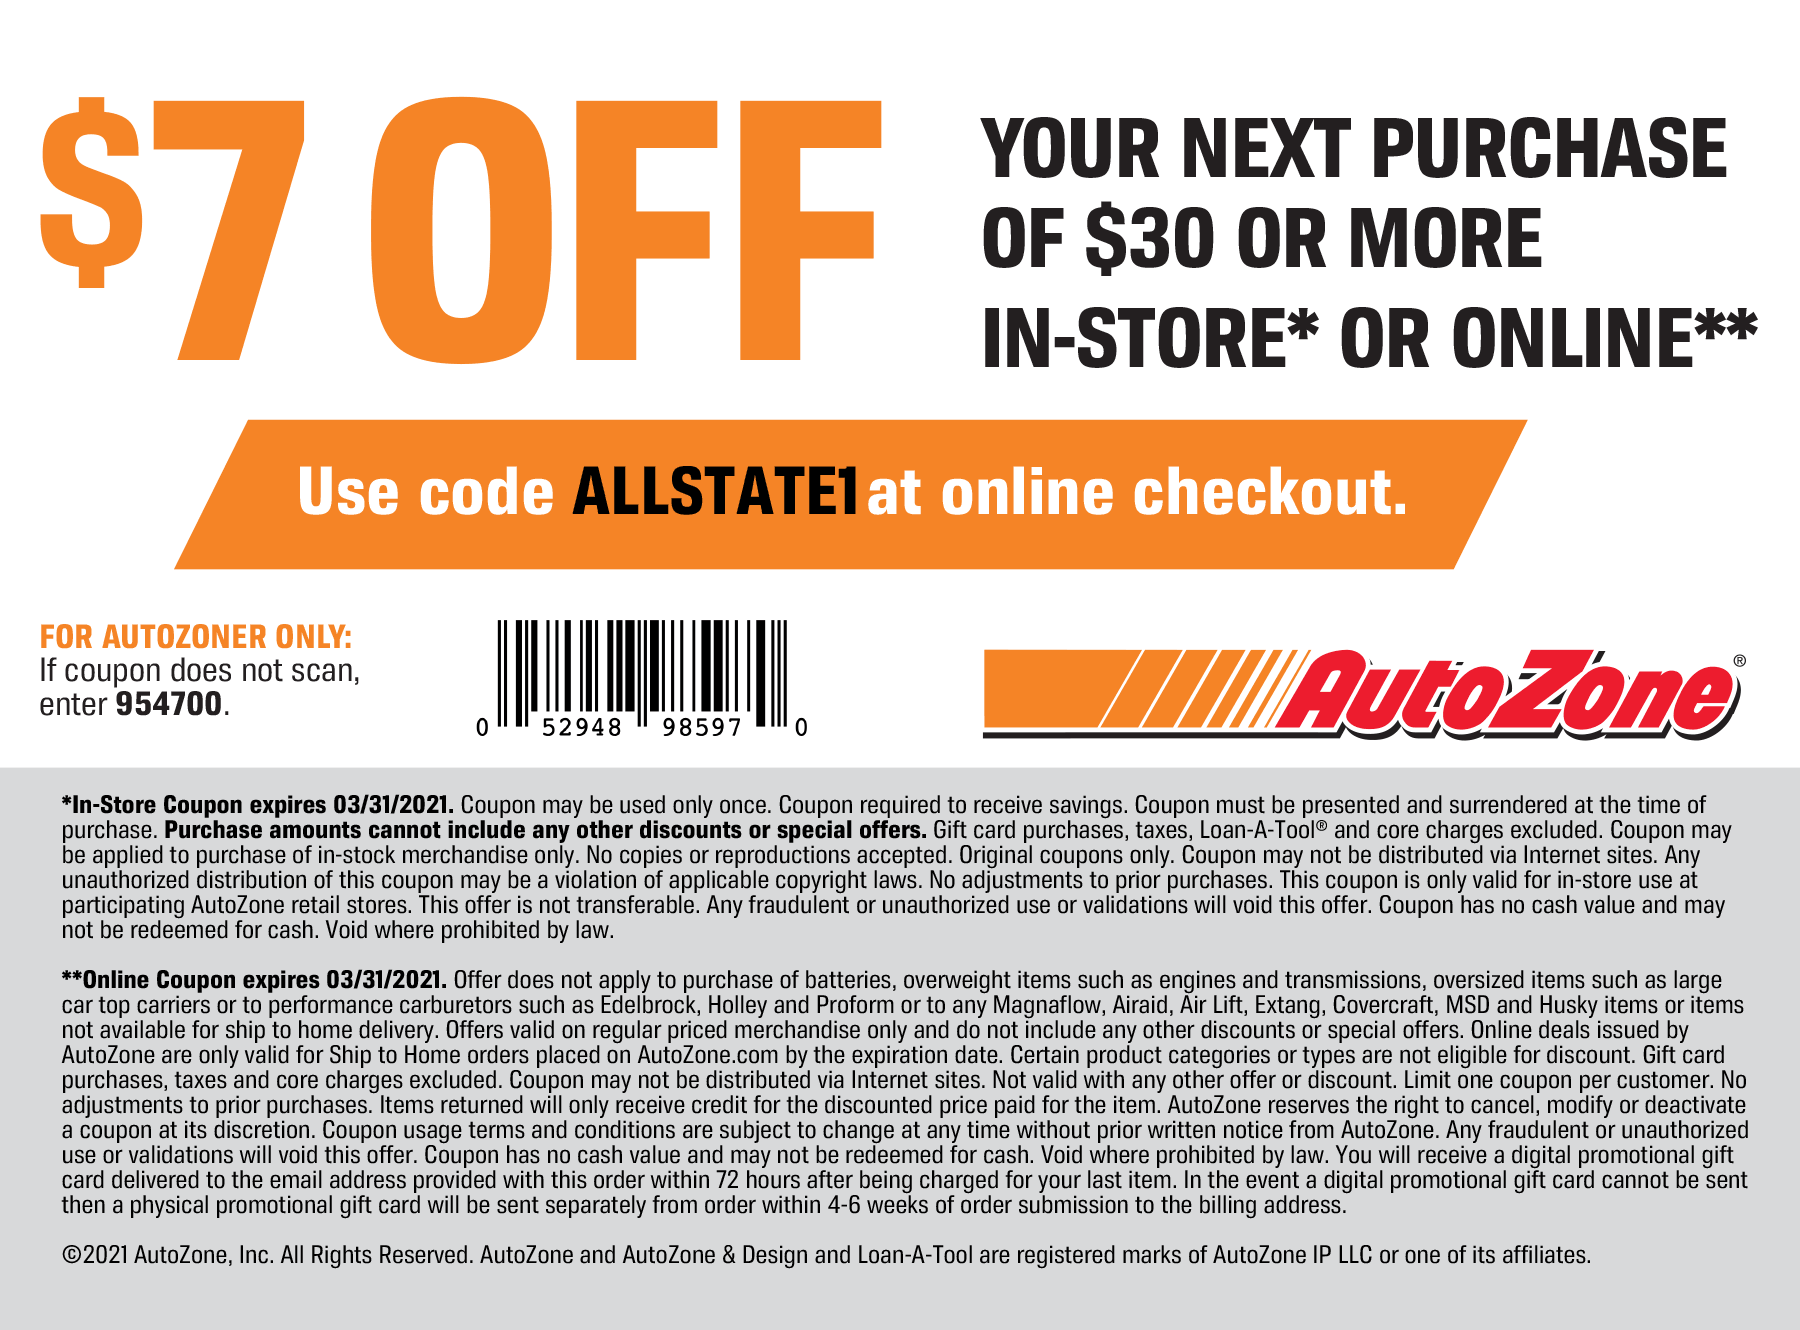 7 off 30 at AutoZone car parts, or online via promo code ALLSTATE1 